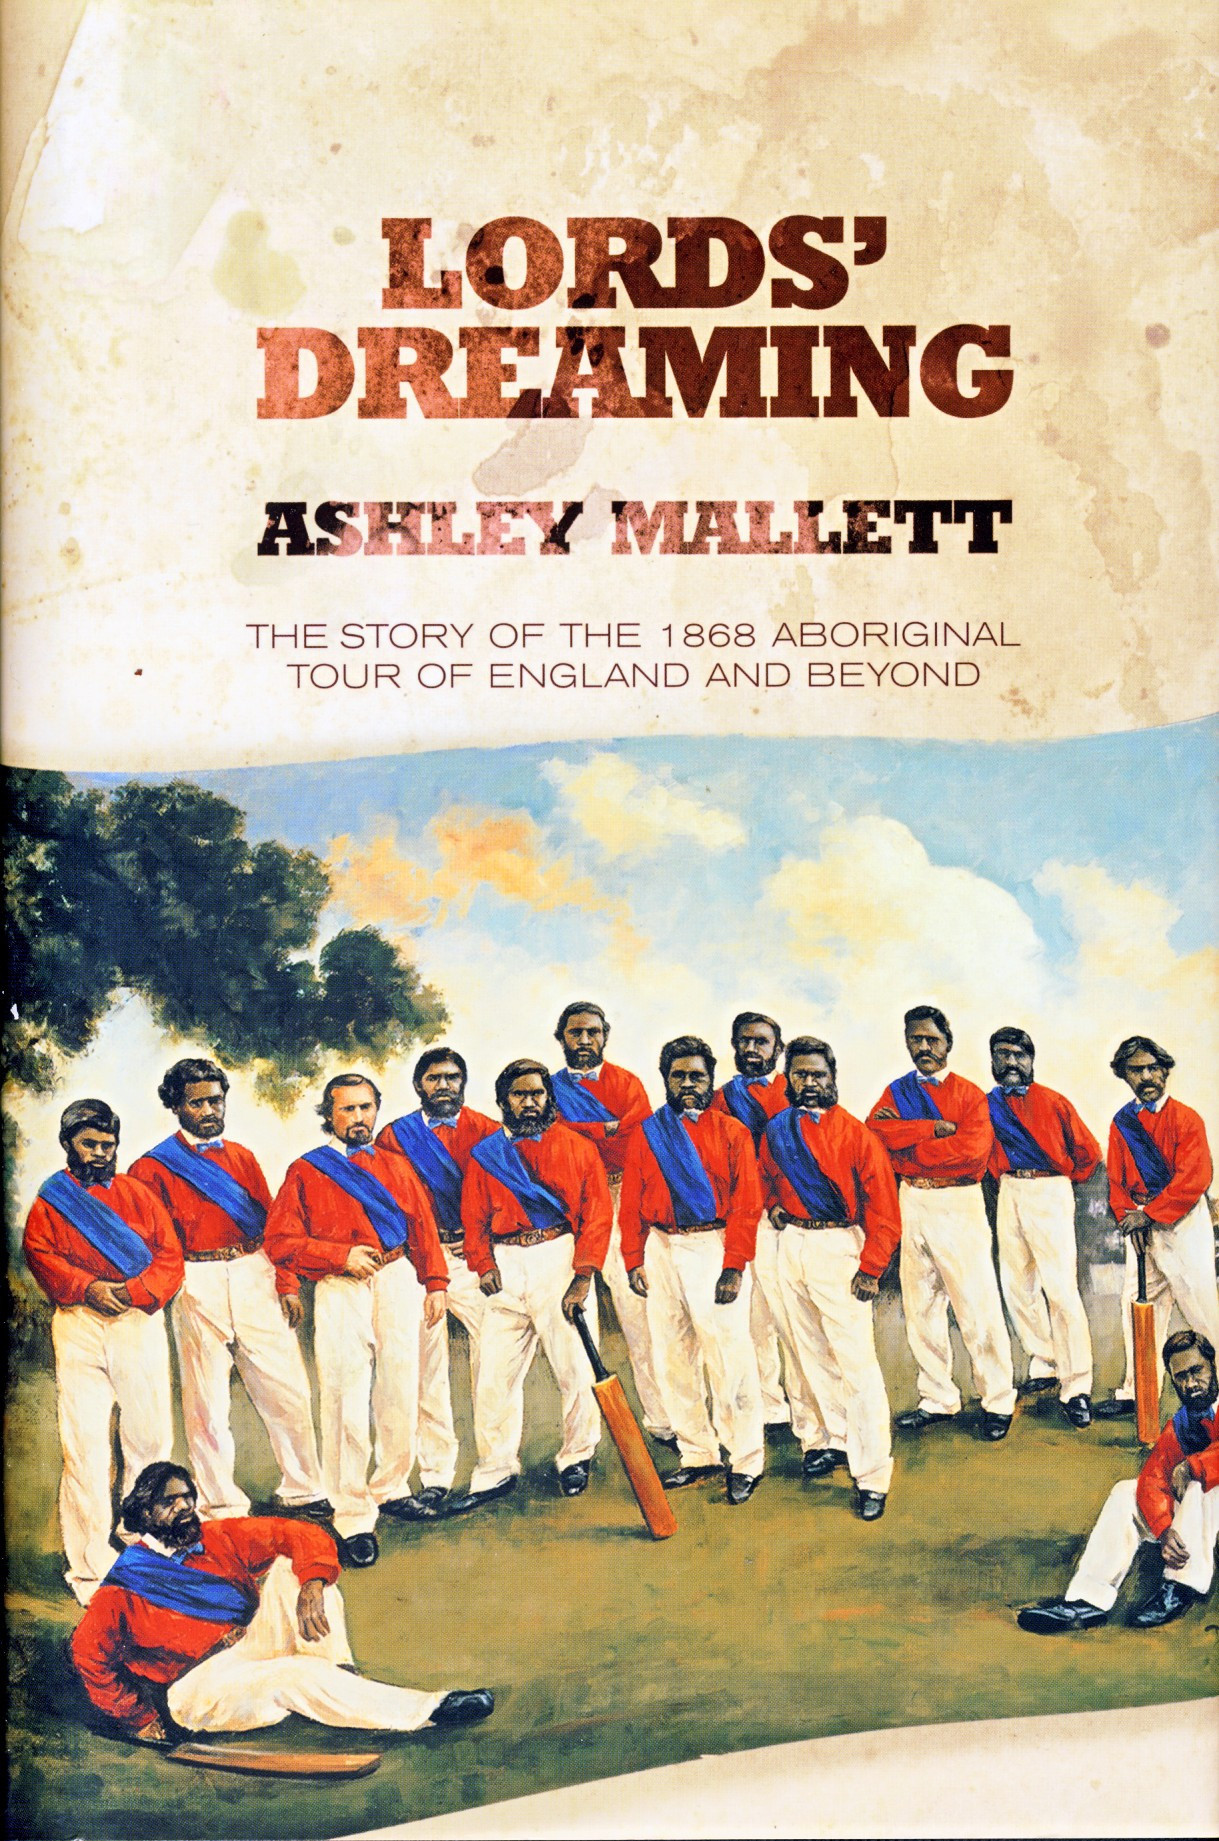 Former Australian spin blower Ashley Mallett  led a team of young players of Aboriginal and Torres Strait Islands descent on a tour of England in 2001 and which included a descendant from the 1868 team ©Philip Barker